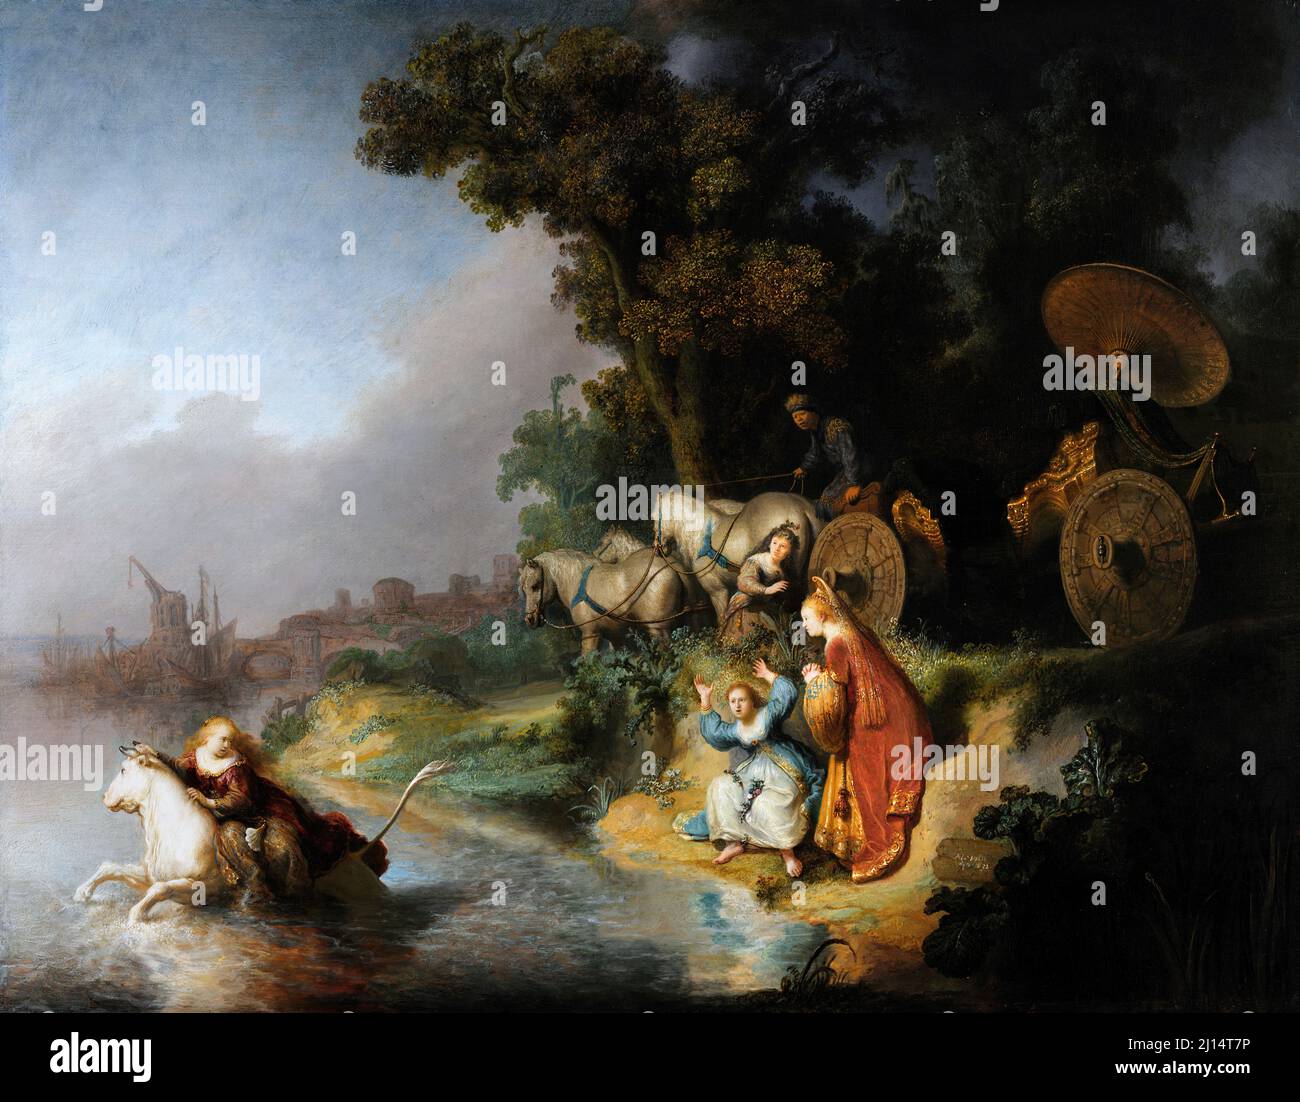 The Abduction of Europa by Rembrandt van Rijn (1606-1669), oil on oak panel, 1632 Stock Photo